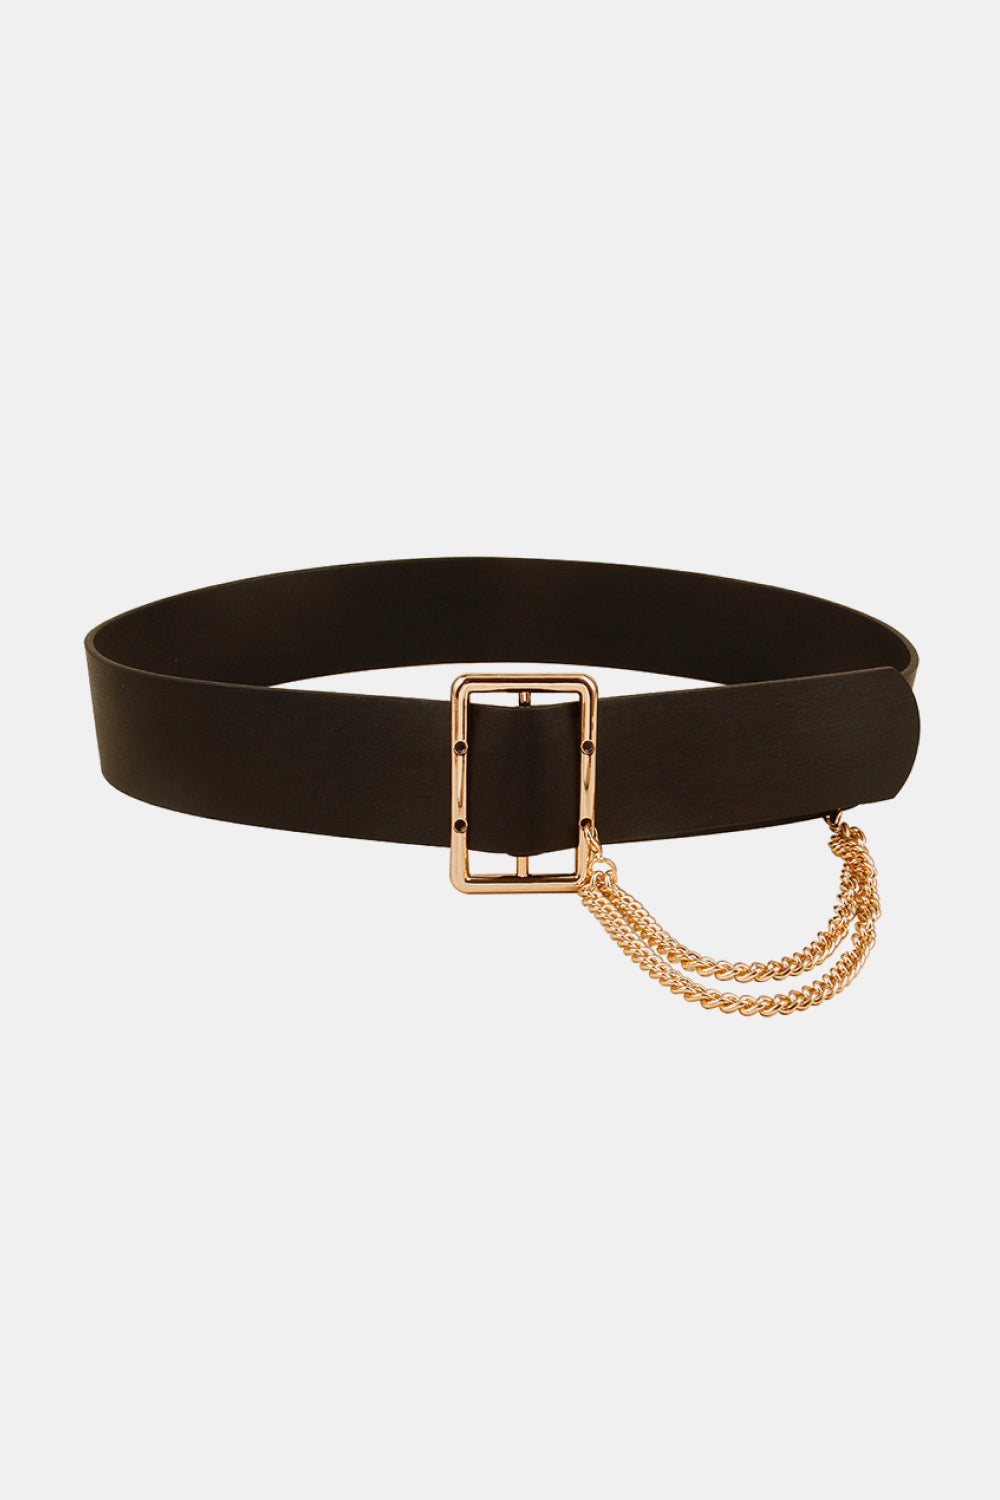 Style Me Leather Wide Belt